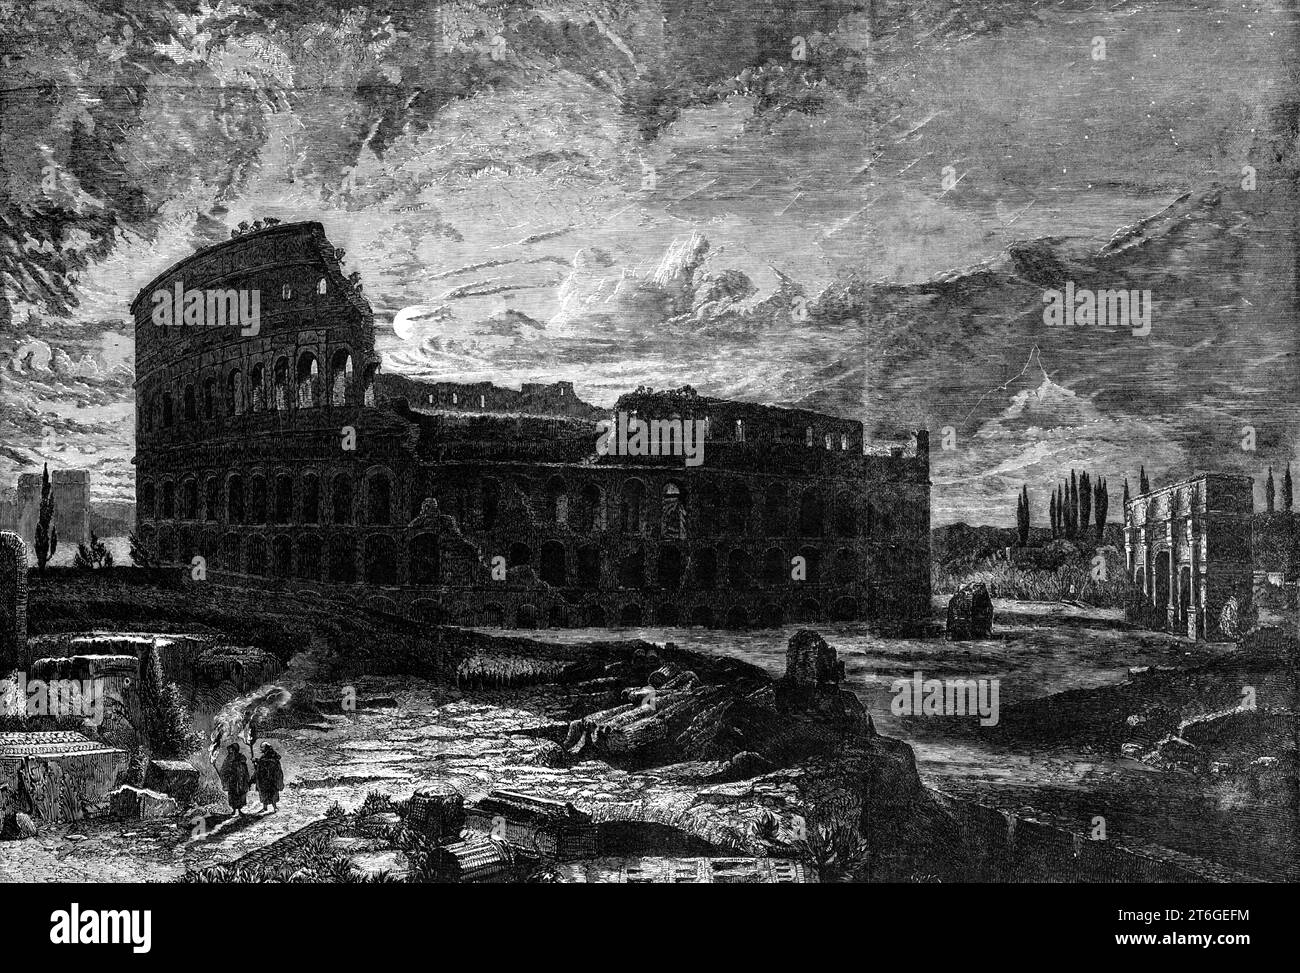 &quot;The Coliseum, Rome&quot;, by F.L. Bridell in the Royal Academy Exhibition, 1860. Engraving of a painting. 'This vast arena, constructed for the indulgence of brutal appetites, covers an area of six English acres, and such was the amount of means which the Emperors had under their power that it was constructed in the course of two years and nine months, and that, in spite of the ravages of time and the hands, ancient and modem, which have despoiled it for its materials, enough of it still survives to tell of the original plan, and to give an idea of the programme of the barbarous entertai Stock Photo